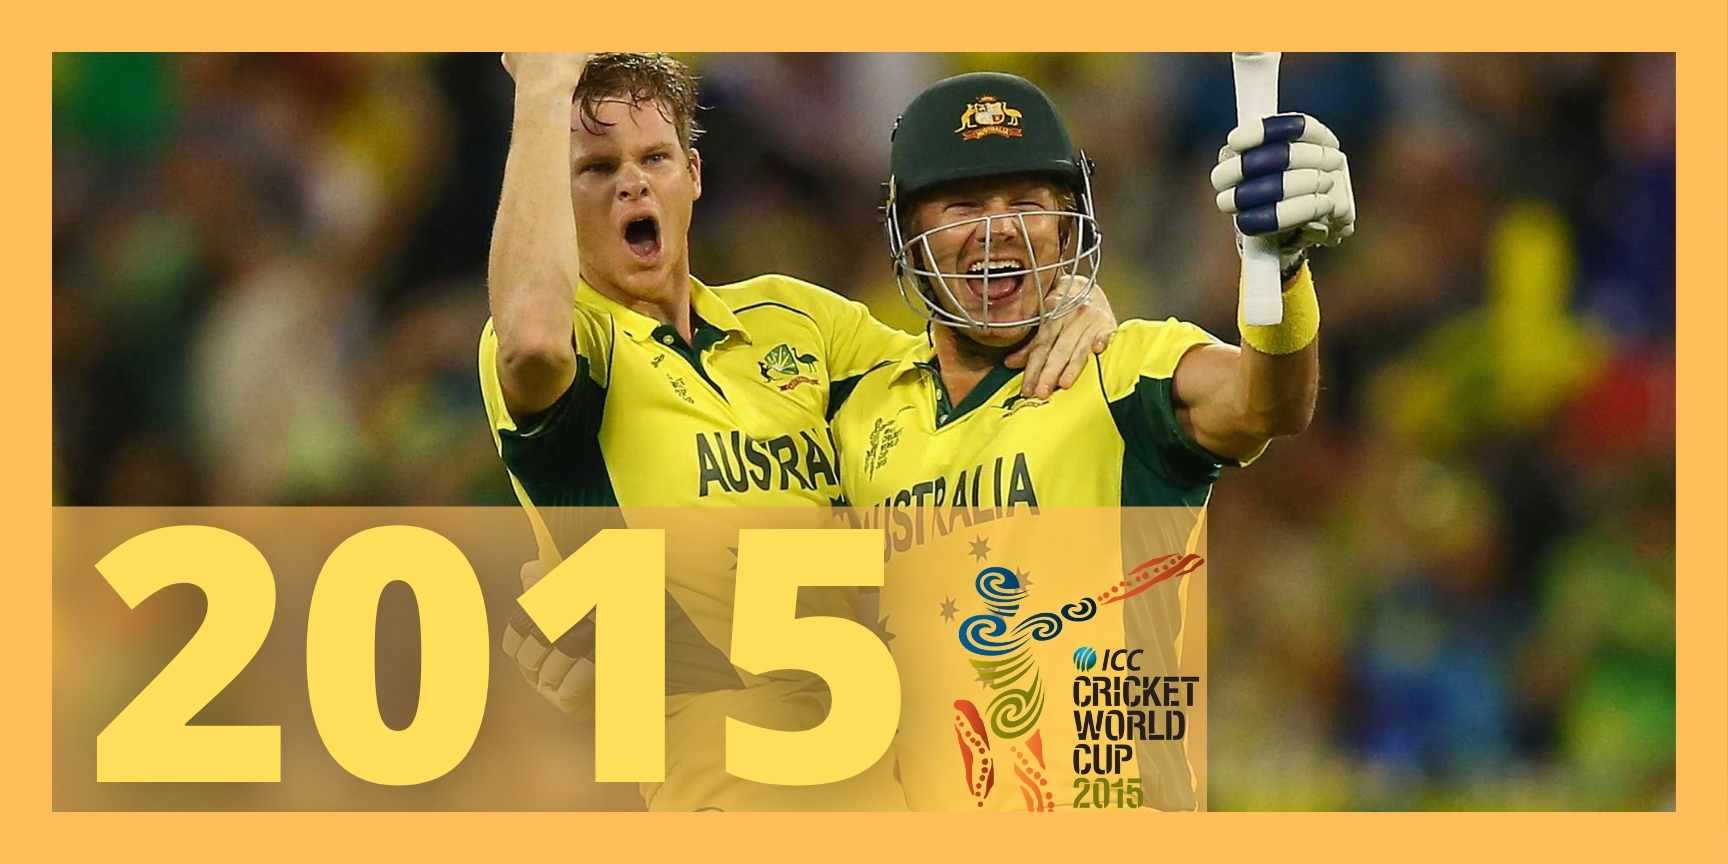 Review of T20 Cricket World Cup in 2015